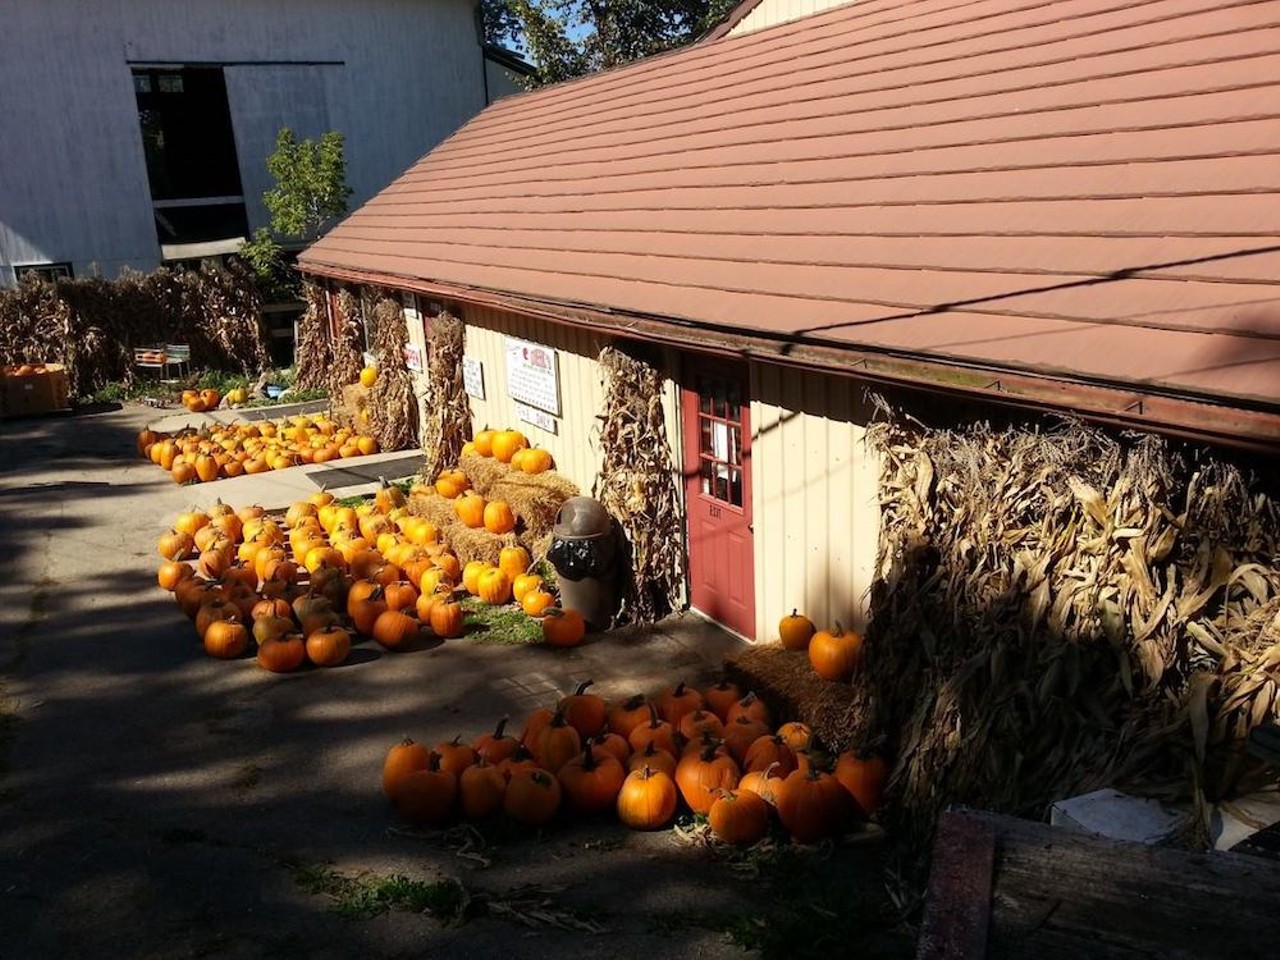 Diehl's Orchard & Cider Mill
1479 Ranch, Holly; 248-634-8981; diehlsorchard.com
For more than 60 years Diehl's Orchard & Cider Mill has grown fresh produce. They&#146;re known for their annual Ciderfest, which is slated for Saturday, Sept. 26 in 2020. The orchard also offers different activities such as a corn maze, hay ride, and pony rides.
Photo via Diehl's Orchard & Cider Mill/Facebook